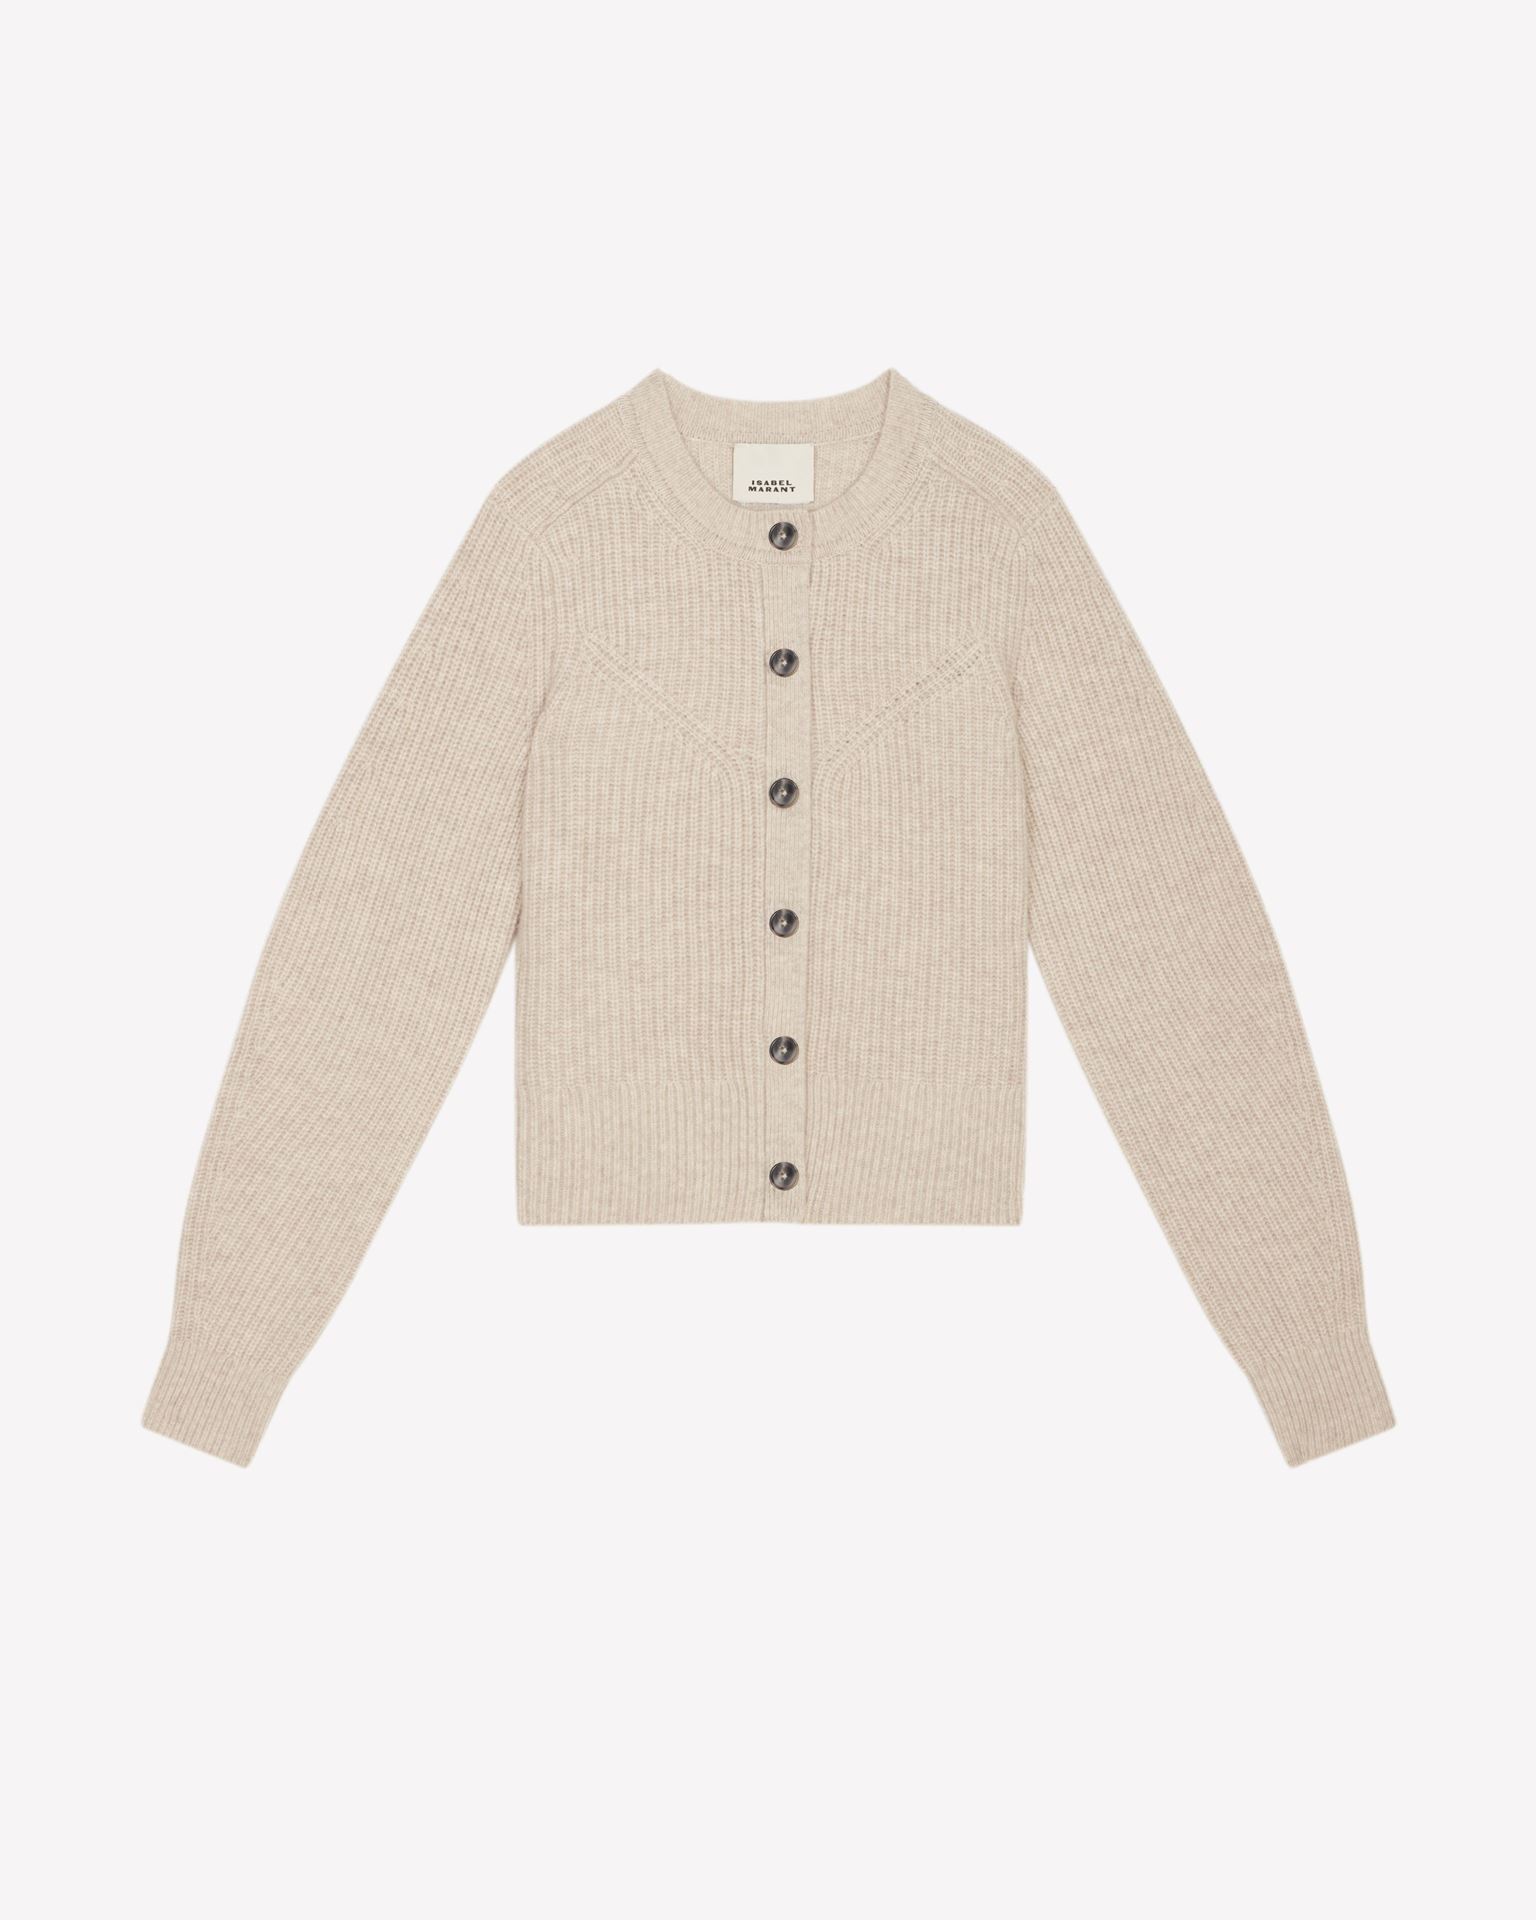 ISABEL MARANT, LAURINE CARDIGAN - Mujer - Beis